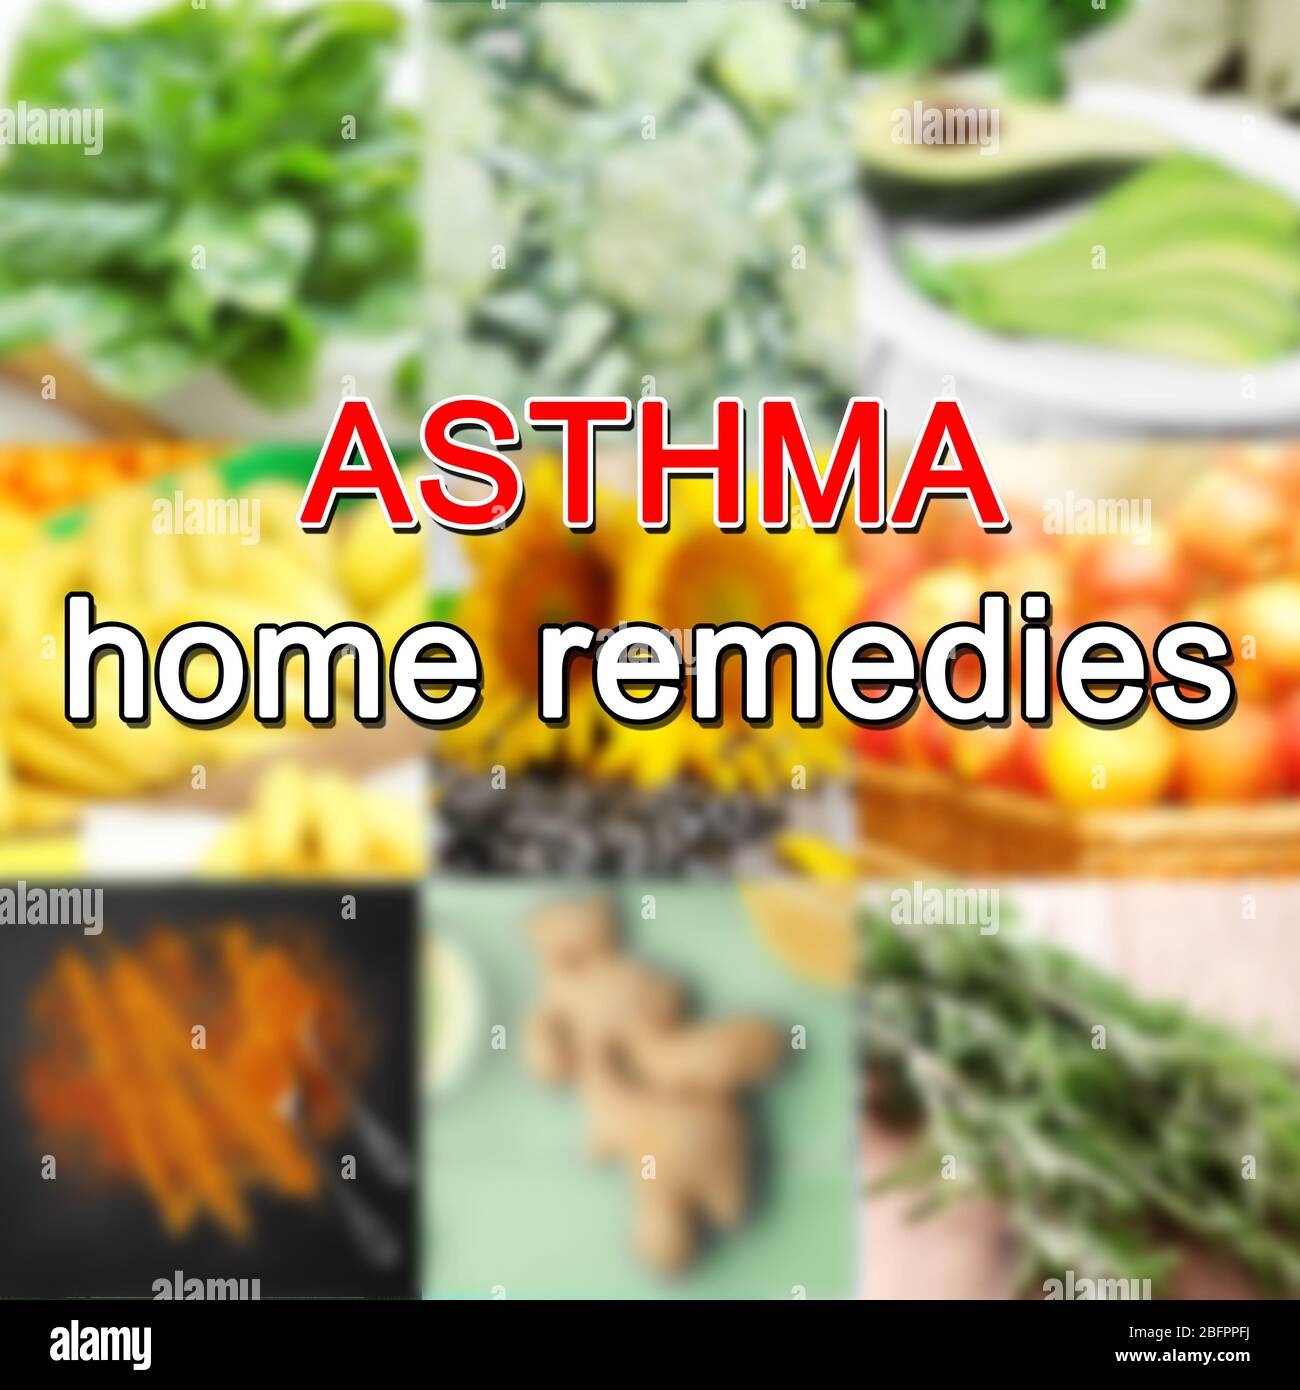 Text ASTHMA HOME REMEDIES on blurred background Stock Photo